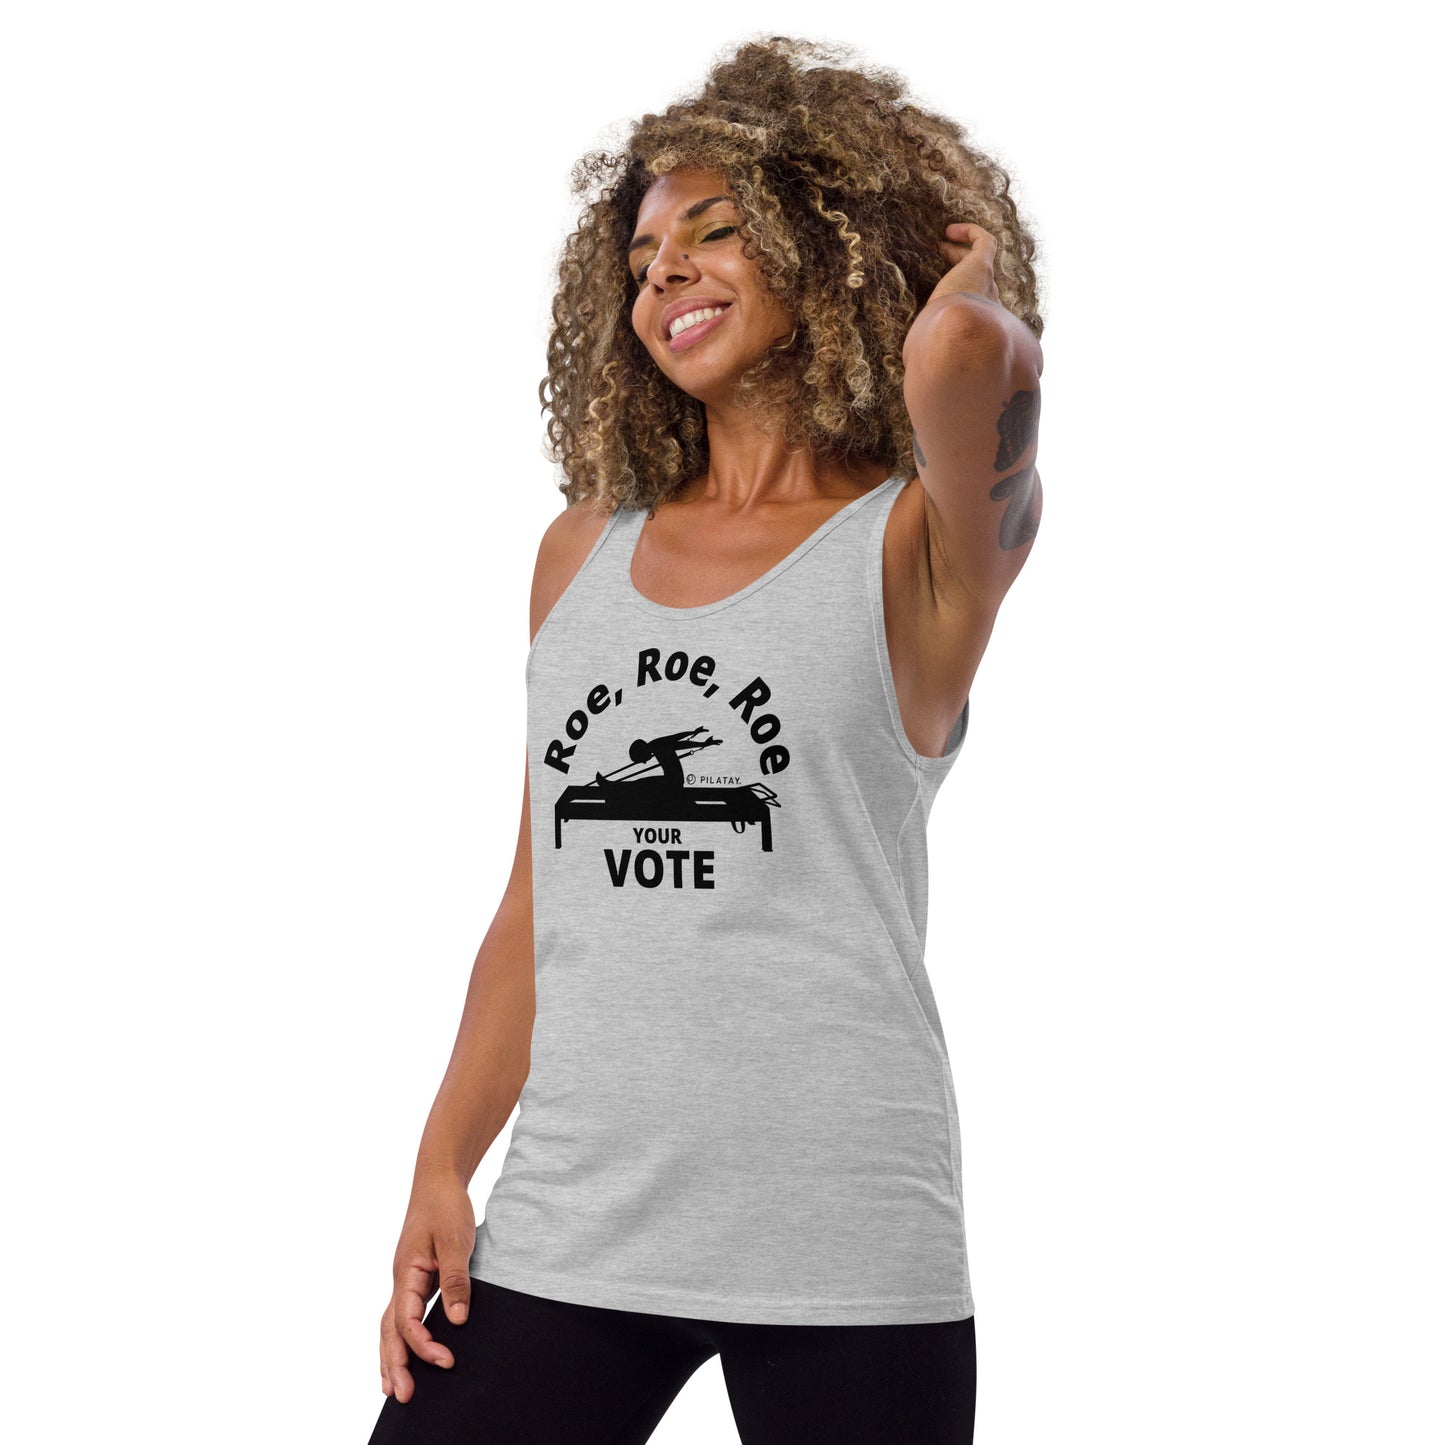 Roe Your Vote Pilates Tank